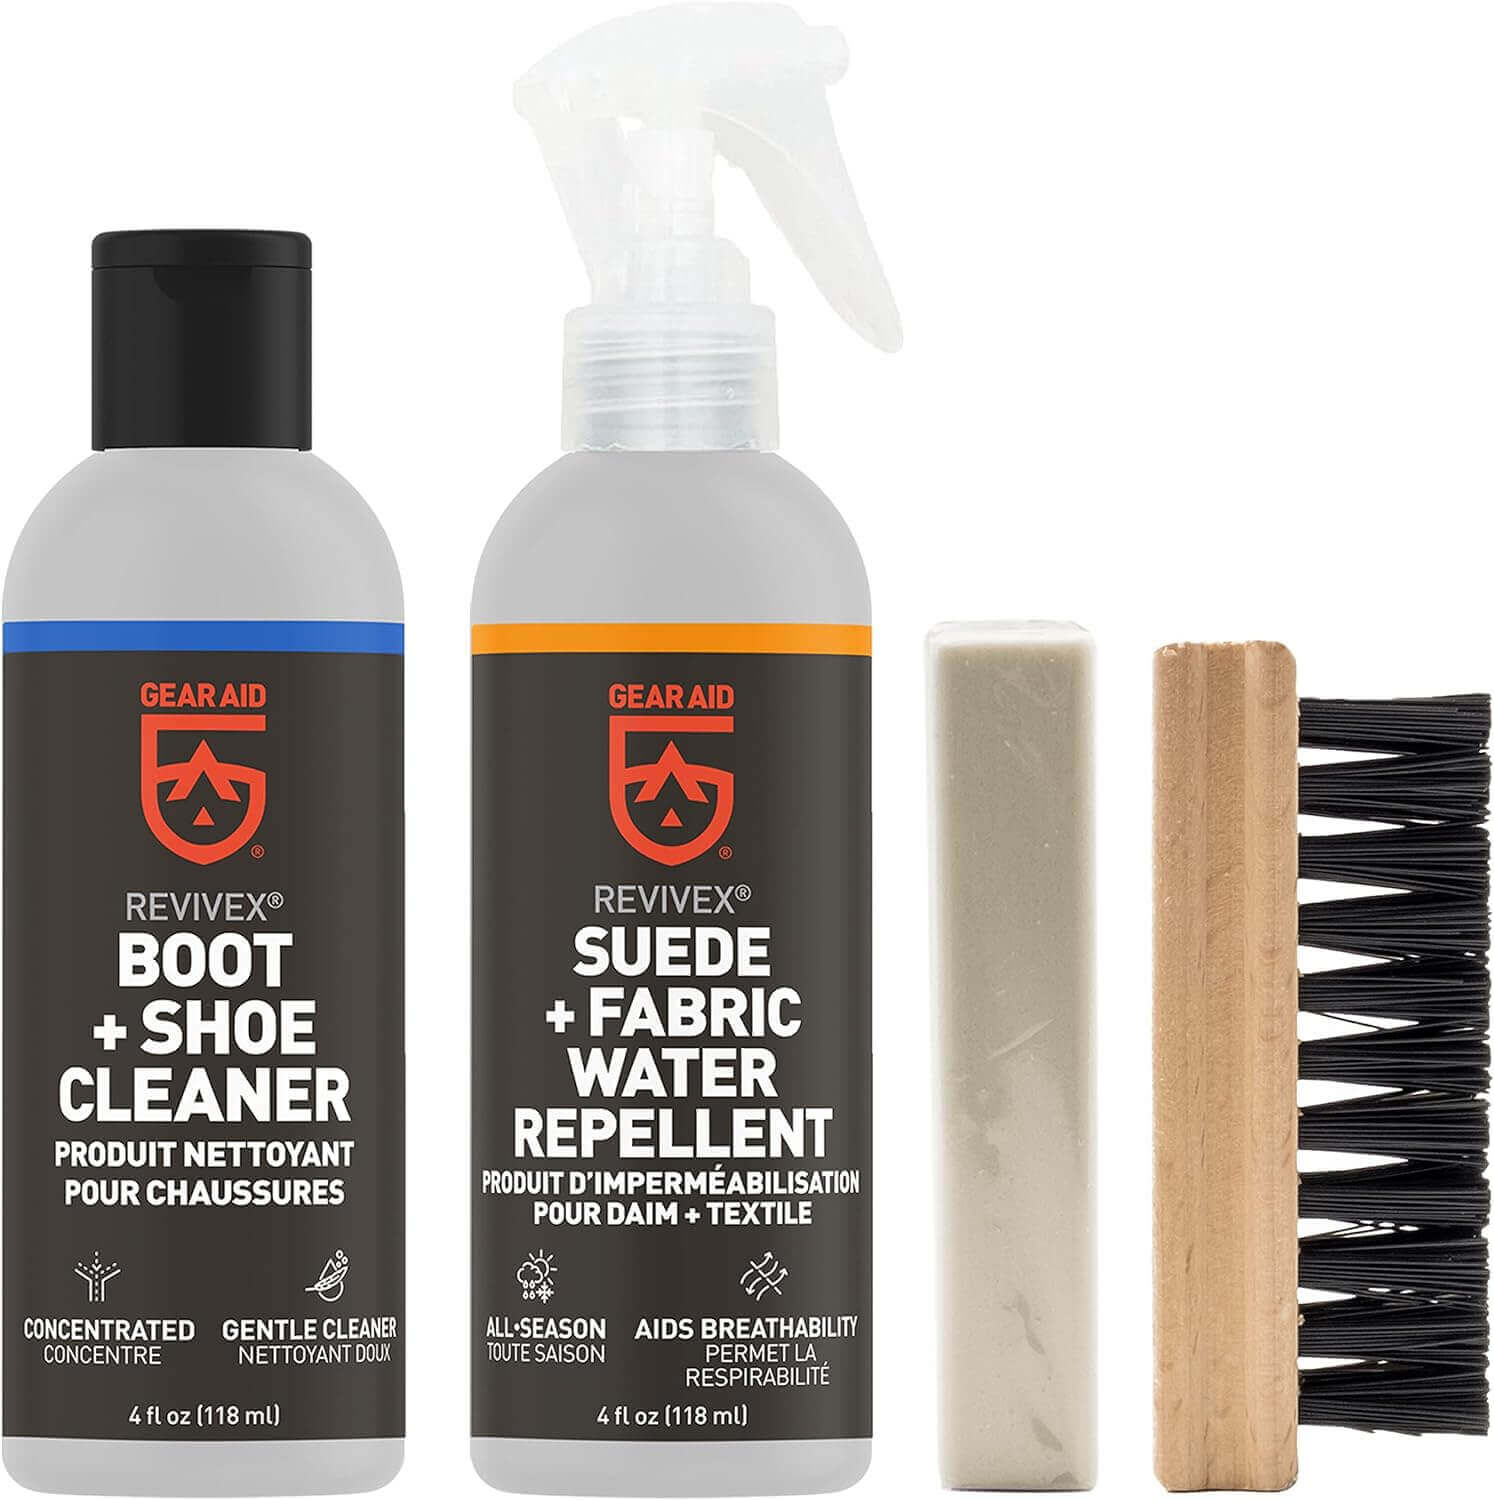 Shop The Latest >GEAR AID Revivex Suede, Nubuck Fabric Boot and Shoe Care Kit > *Only $35.03*> From The Top Brand > *Gear Aidl* > Shop Now and Get Free Shipping On Orders Over $45.00 >*Shop Earth Foot*